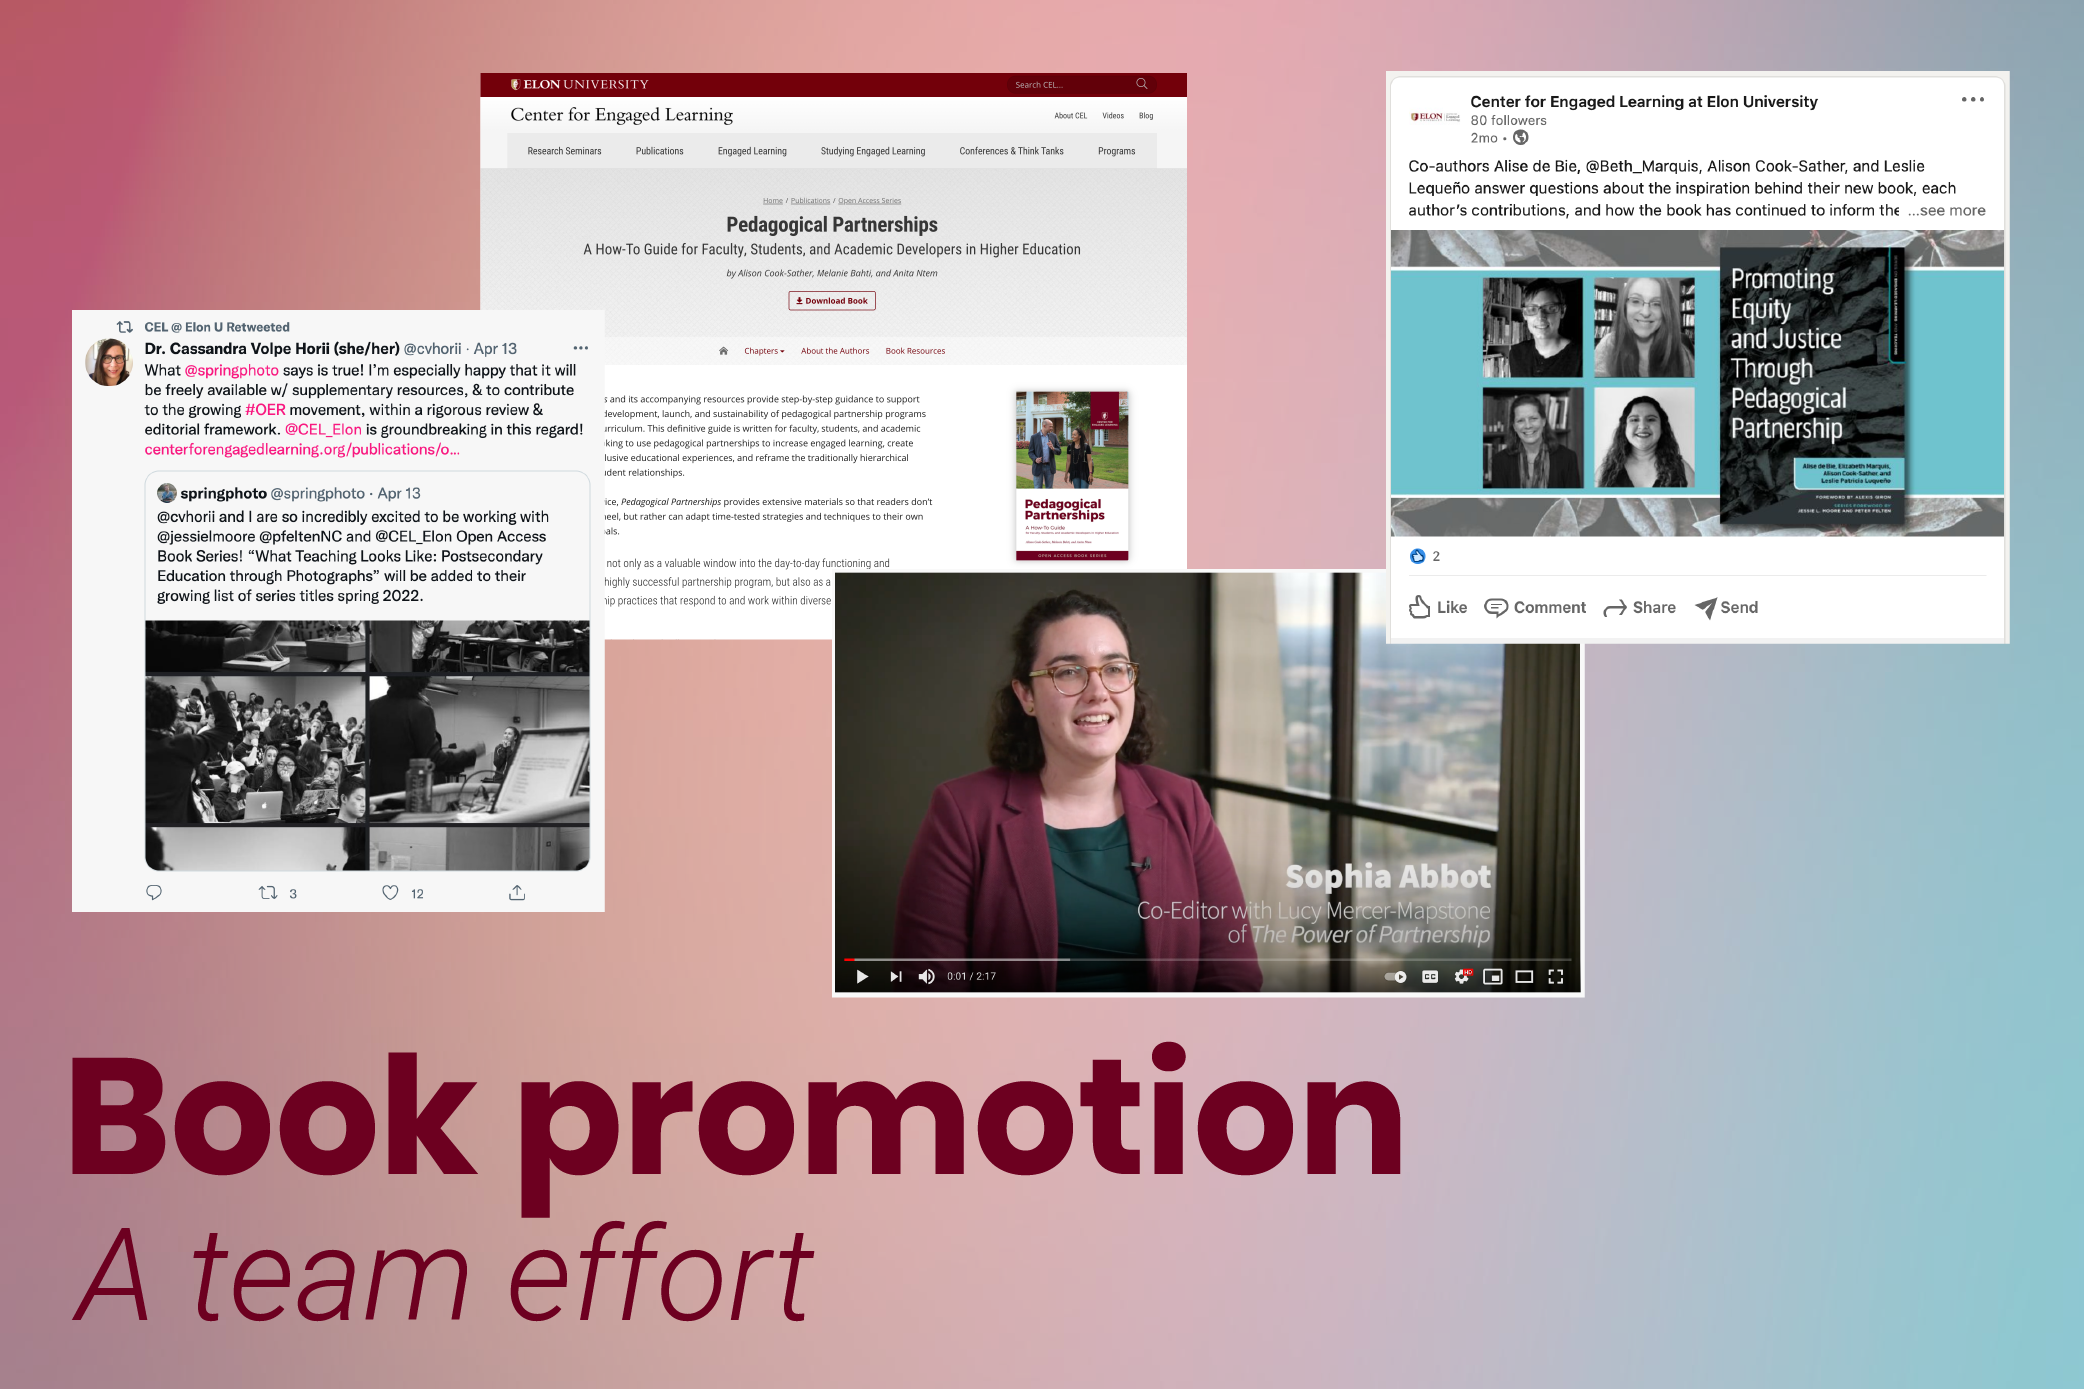 "Book promotion -- a team effort", with screenshots of various promotion materials like book website, social media posts, and book trailers